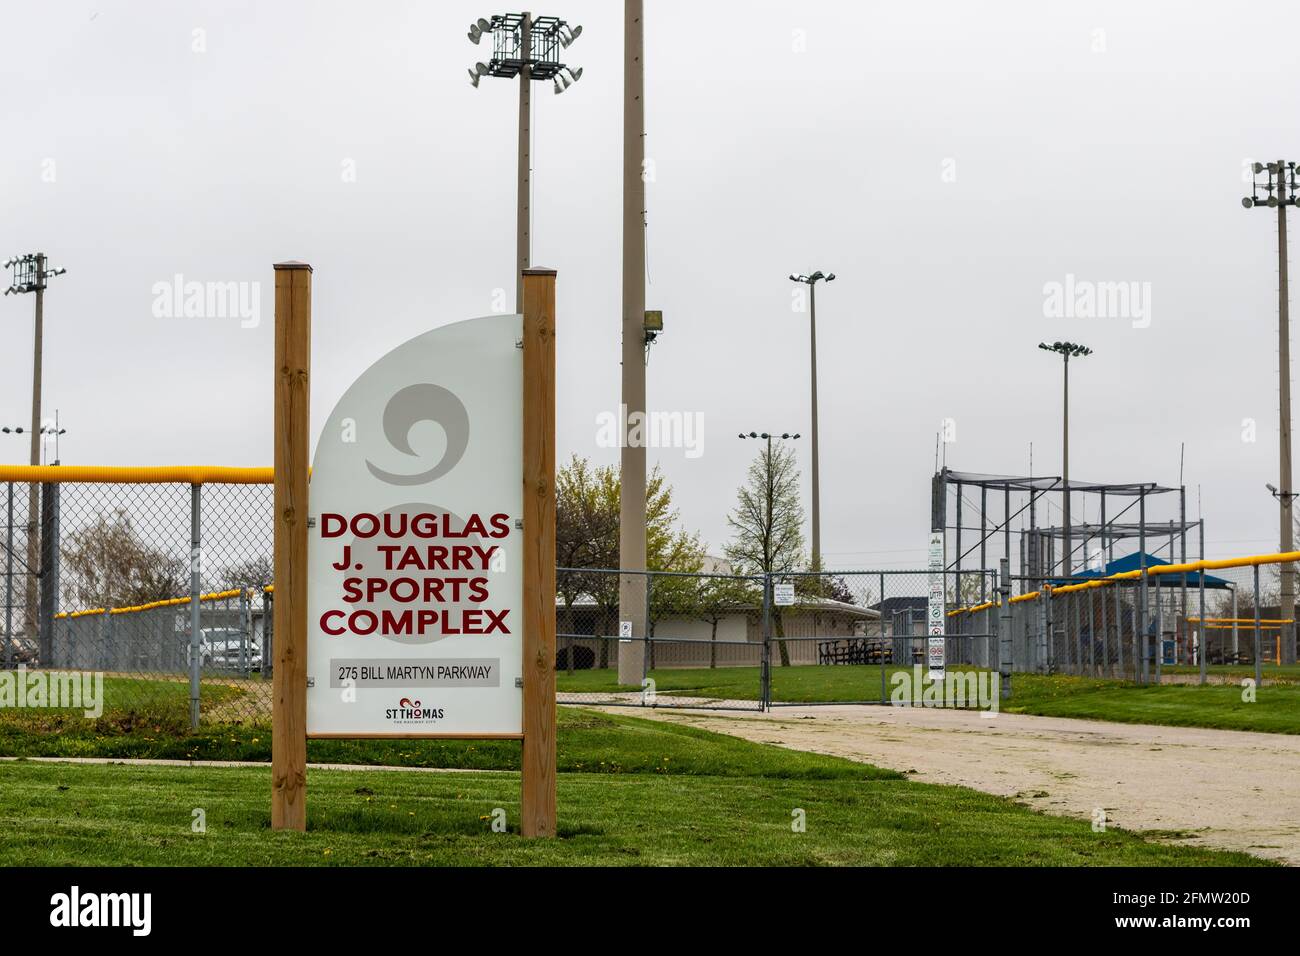 Douglas J. Tarry Sports Complex in St. Thomas, Ontario, Canada, on May 4 2021. Public baseball diamonds and soccer fields. Stock Photo